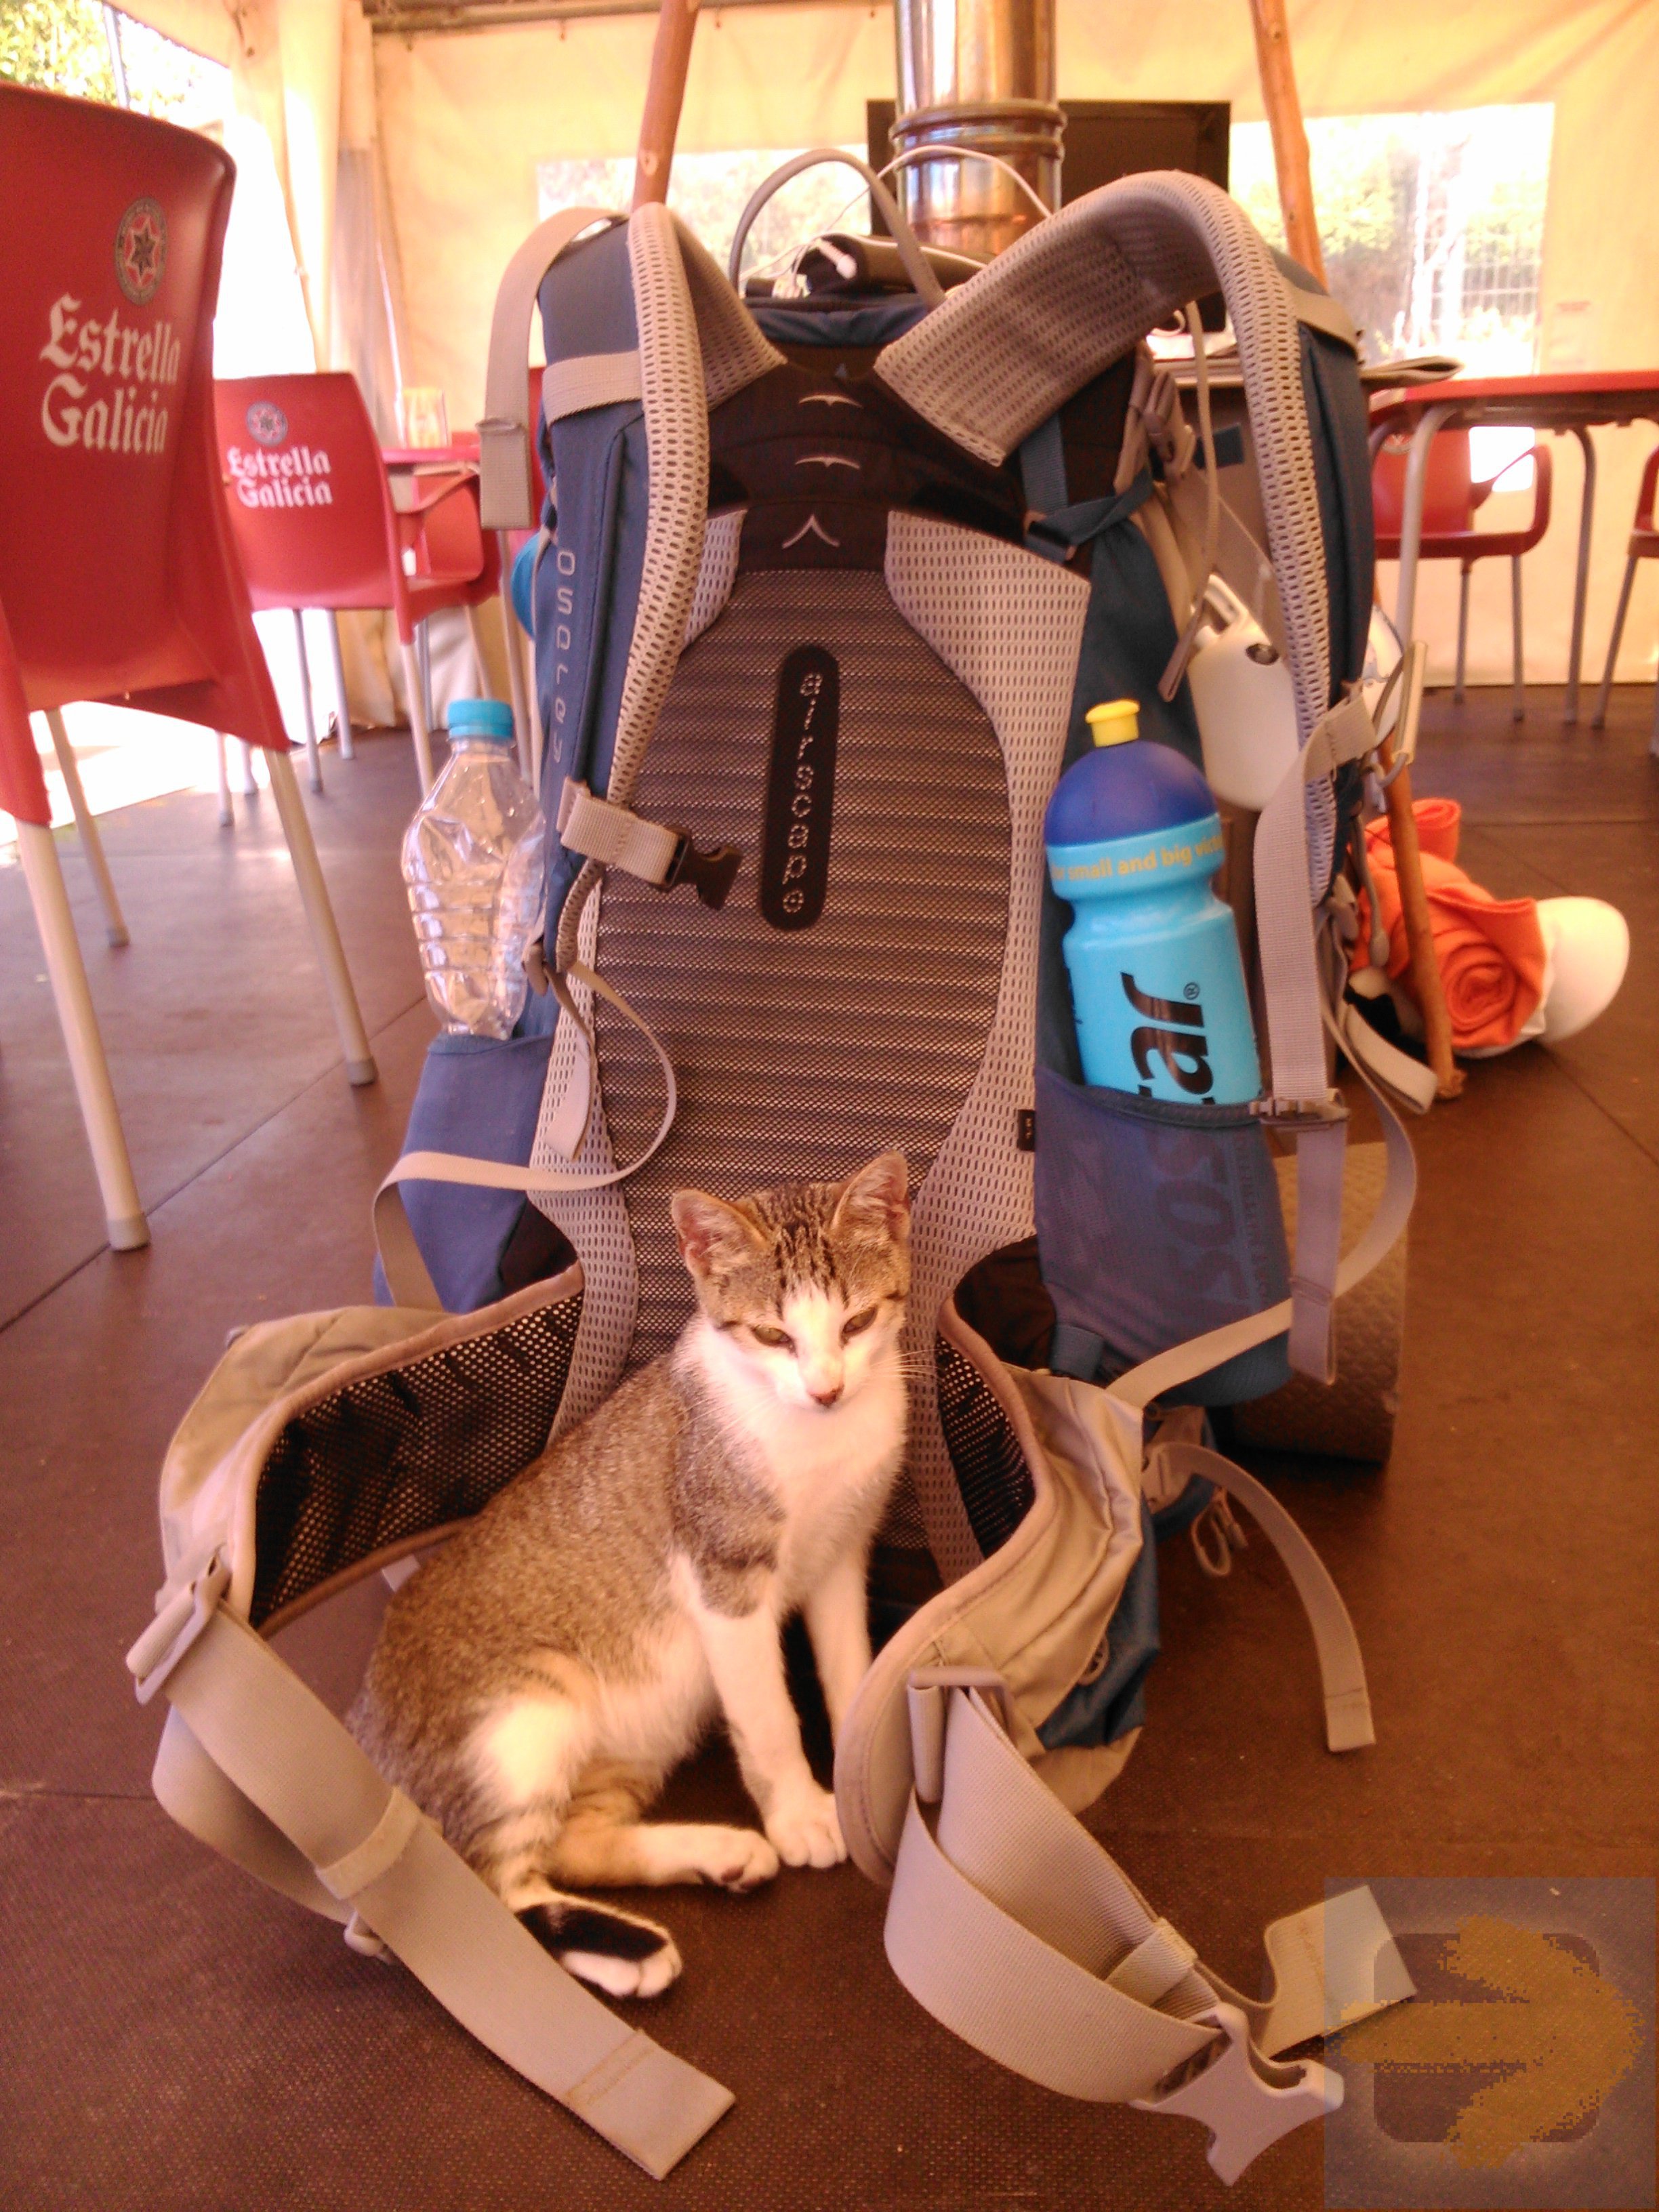 This cat wanted my backpack! :)